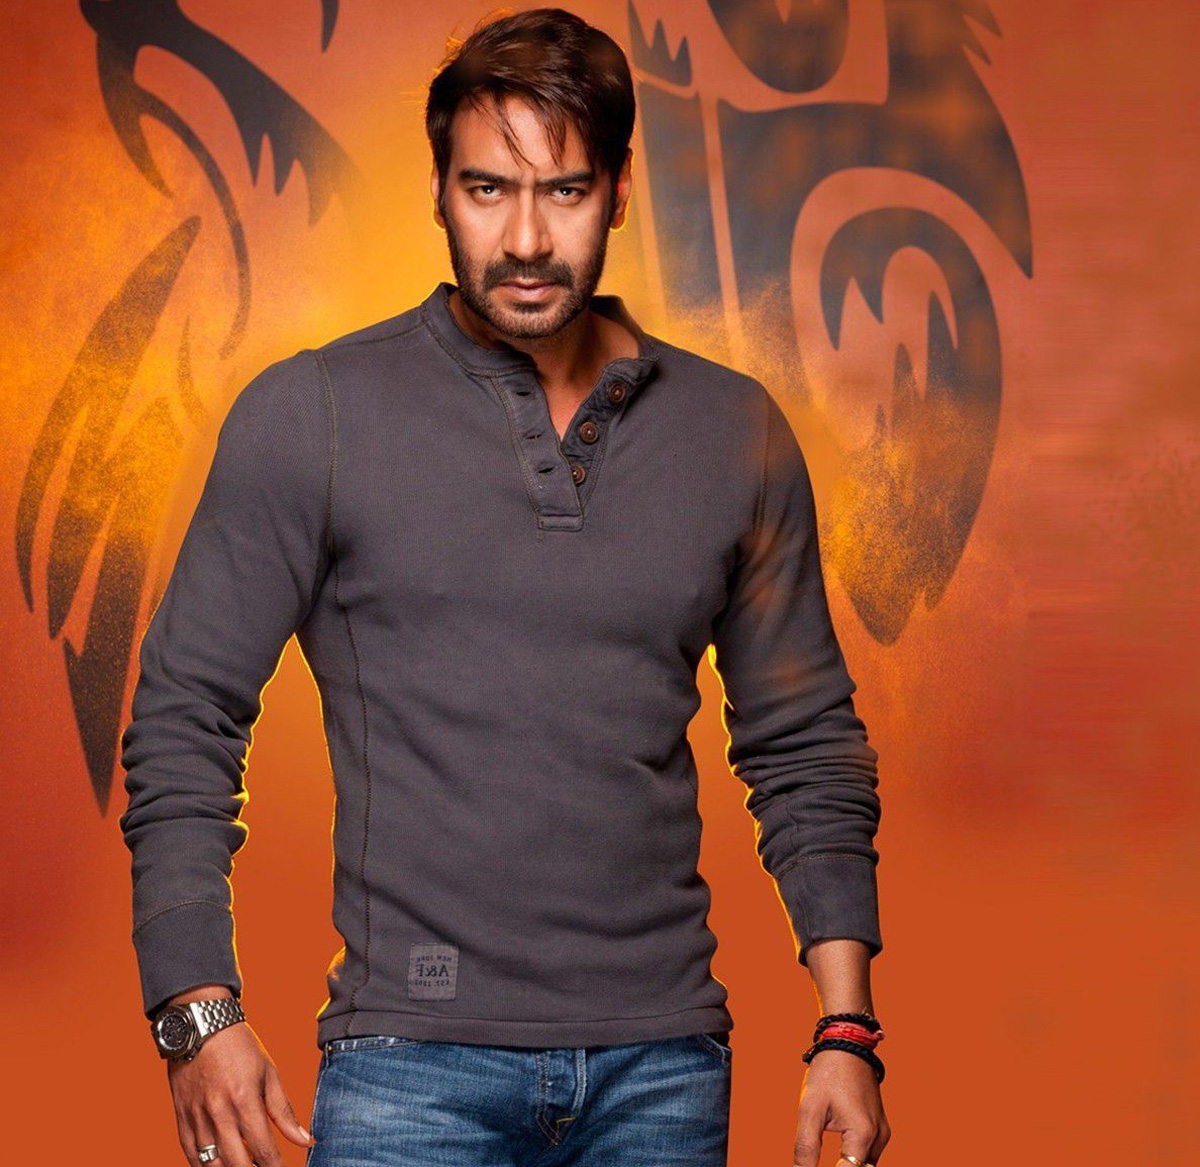 Ajay Devgn believes in luck as well as controversies: Netizens